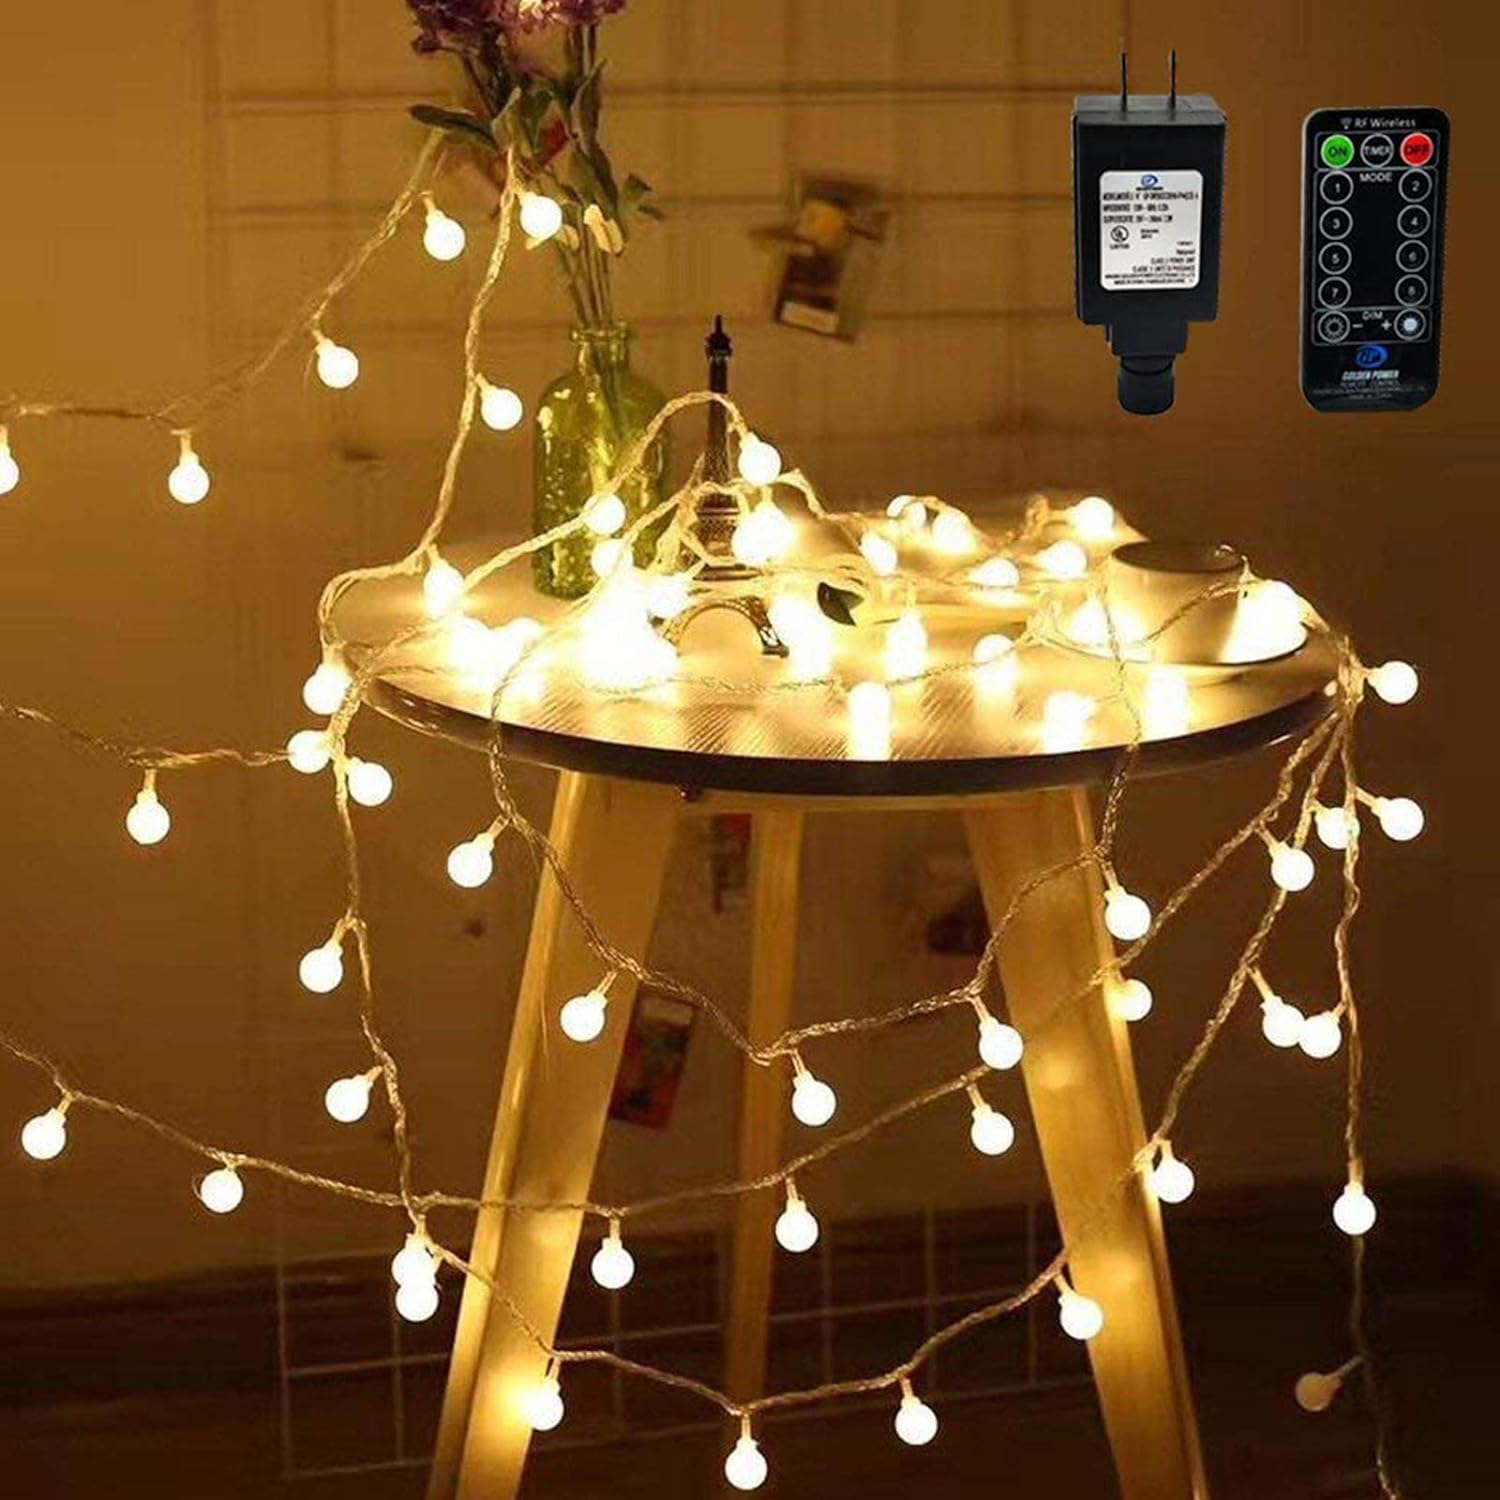 49ft 100 LED Globe String Lights with Remote, 8 Modes, Plug-in Fairy String Lights for Indoor Outdoor Party Wedding Christmas Tree Garden, Warm White - Eco-Friendly, Durable and Energy-Saving